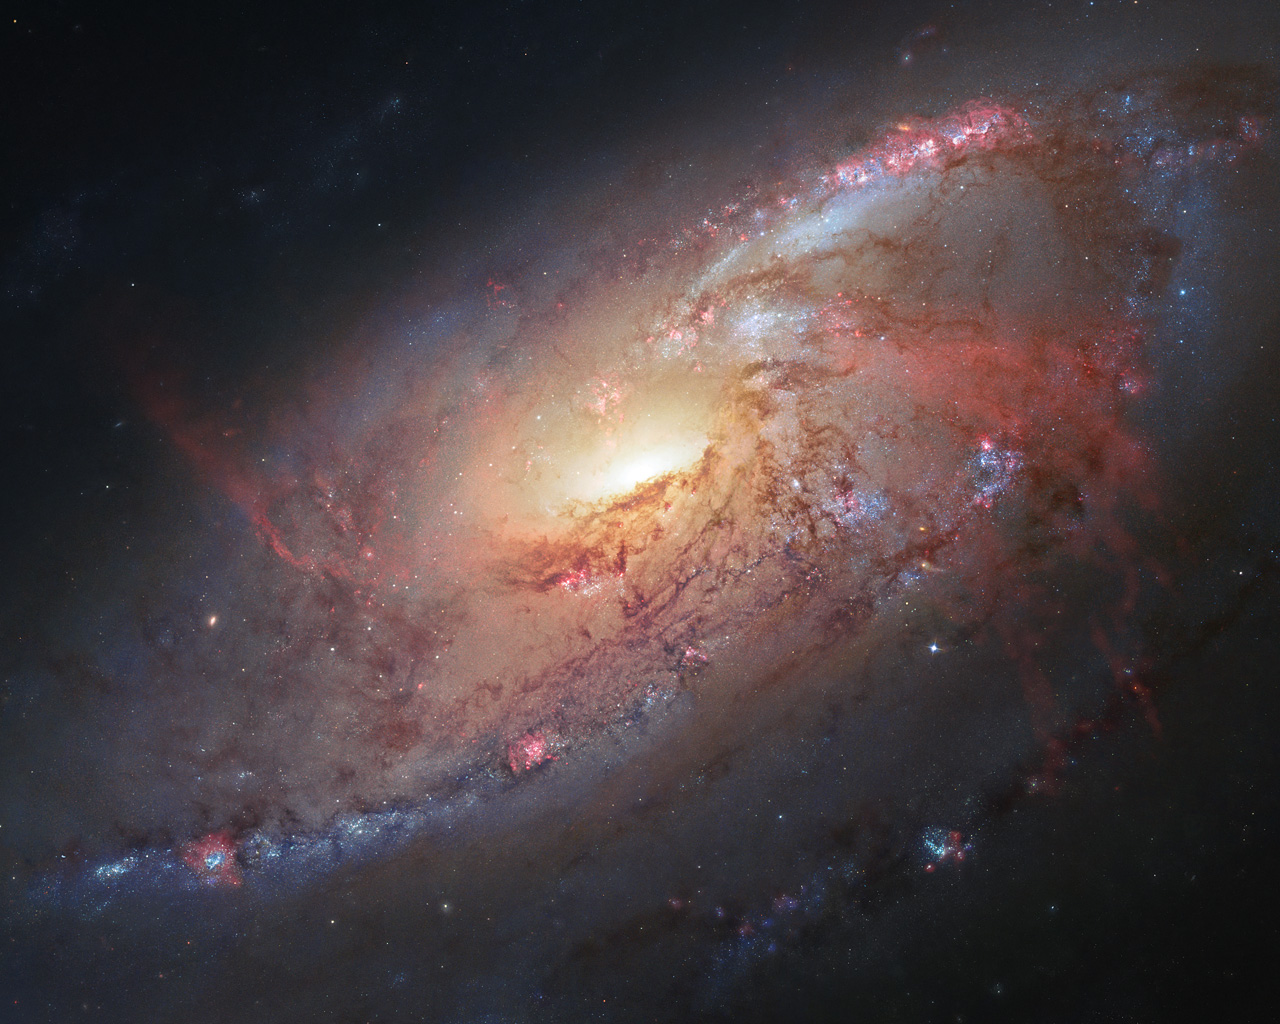 This image combines Hubble observations of M 106 with additional information captured by amateur astronomers Robert Gendler and Jay GaBany. Gendler combined Hubble data with his own observations to produce this stunning colour image. M 106 is a relatively nearby spiral galaxy, a little over 20 million light-years away.